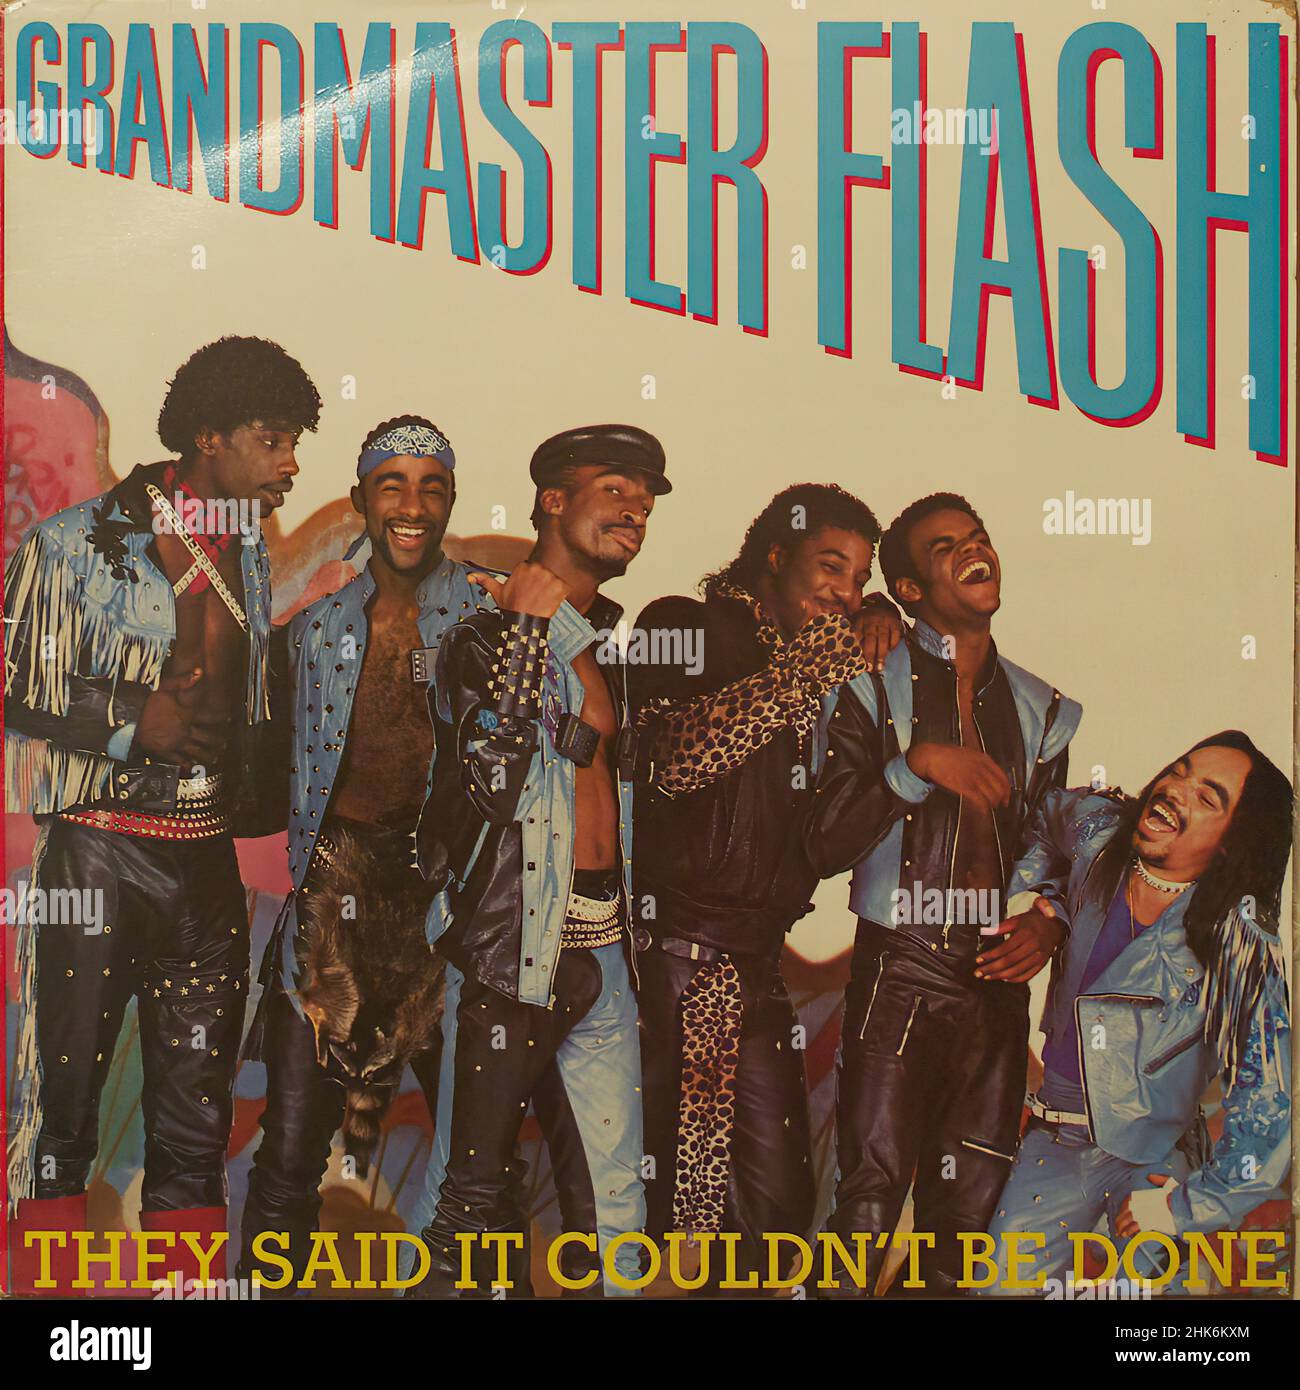 Grandmaster Flash and the Furious Five (Music) - TV Tropes